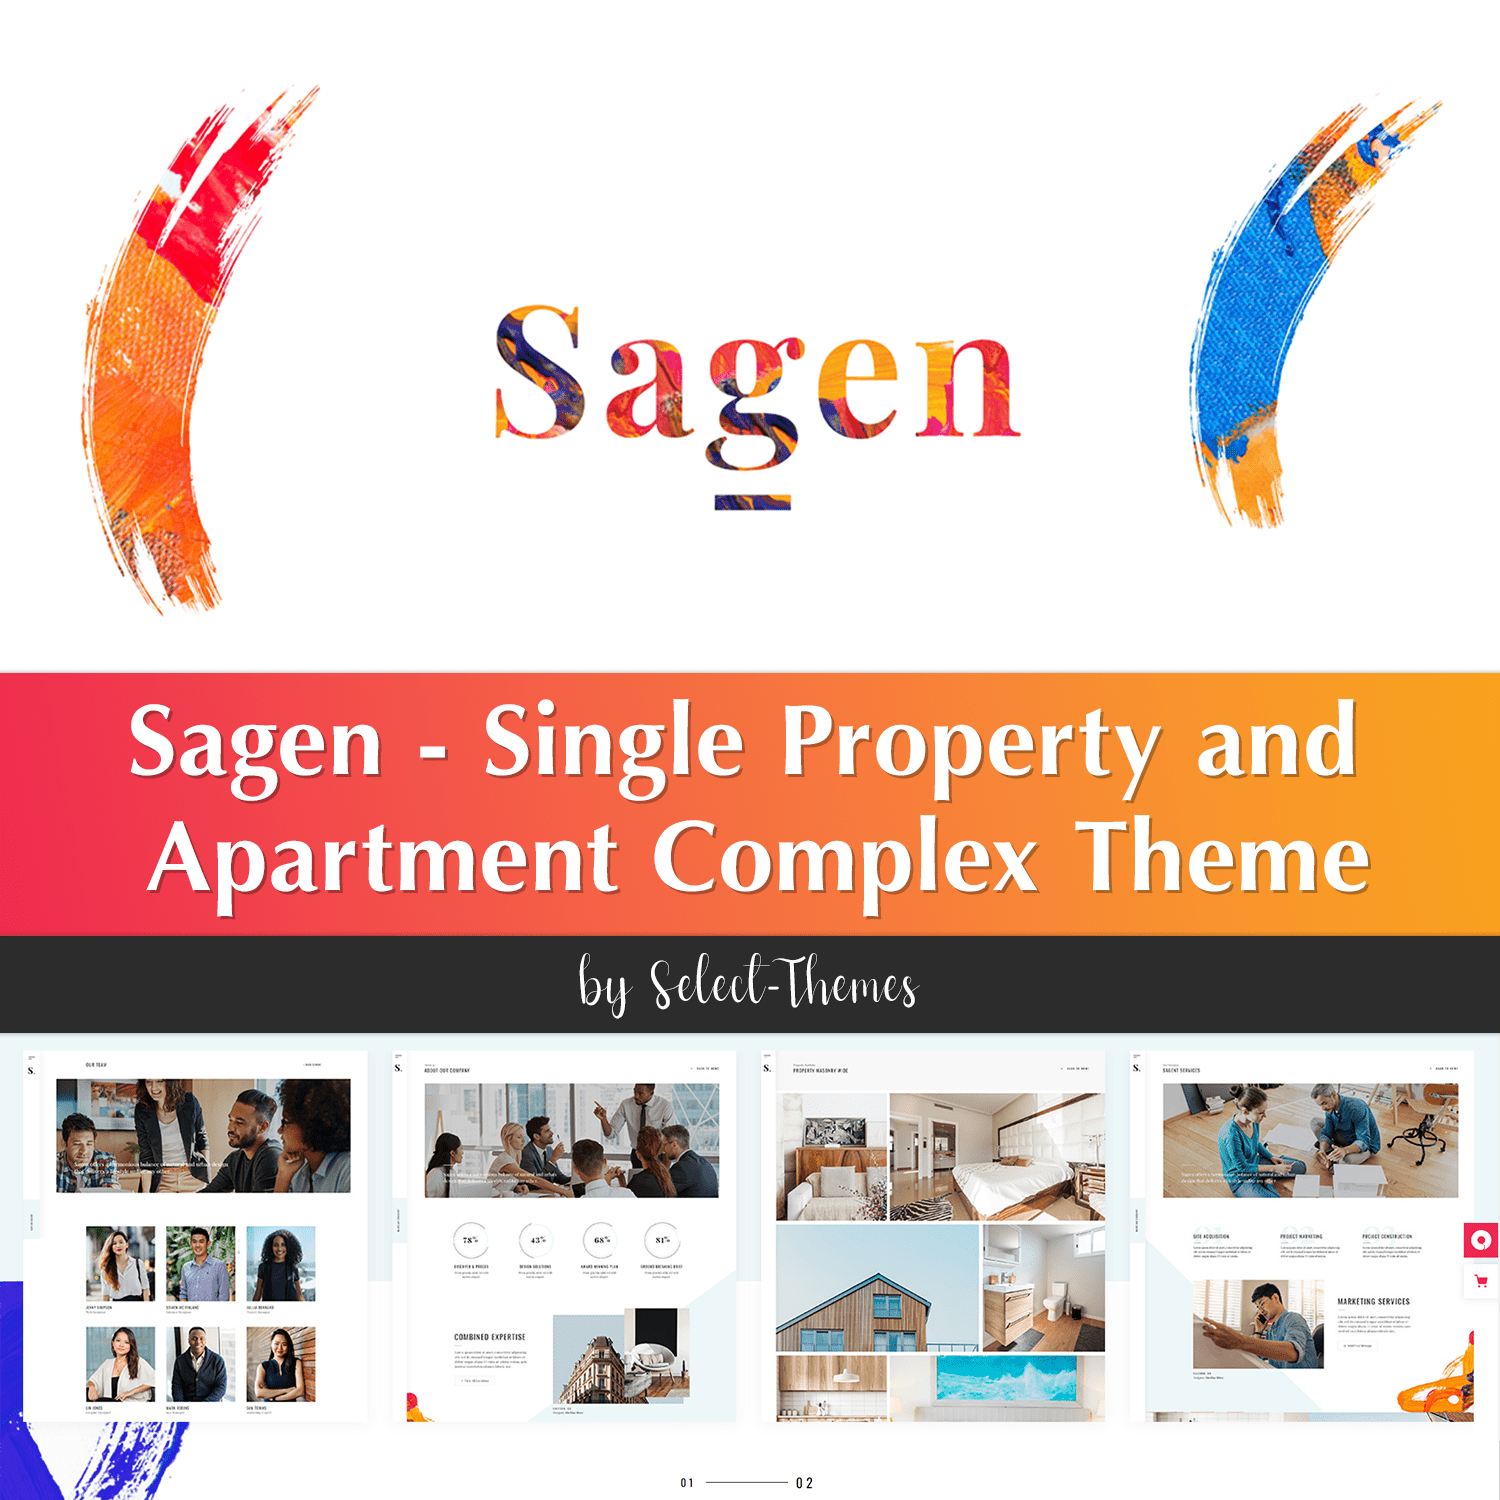 Sagen - Single Property And Apartment Complex Theme.